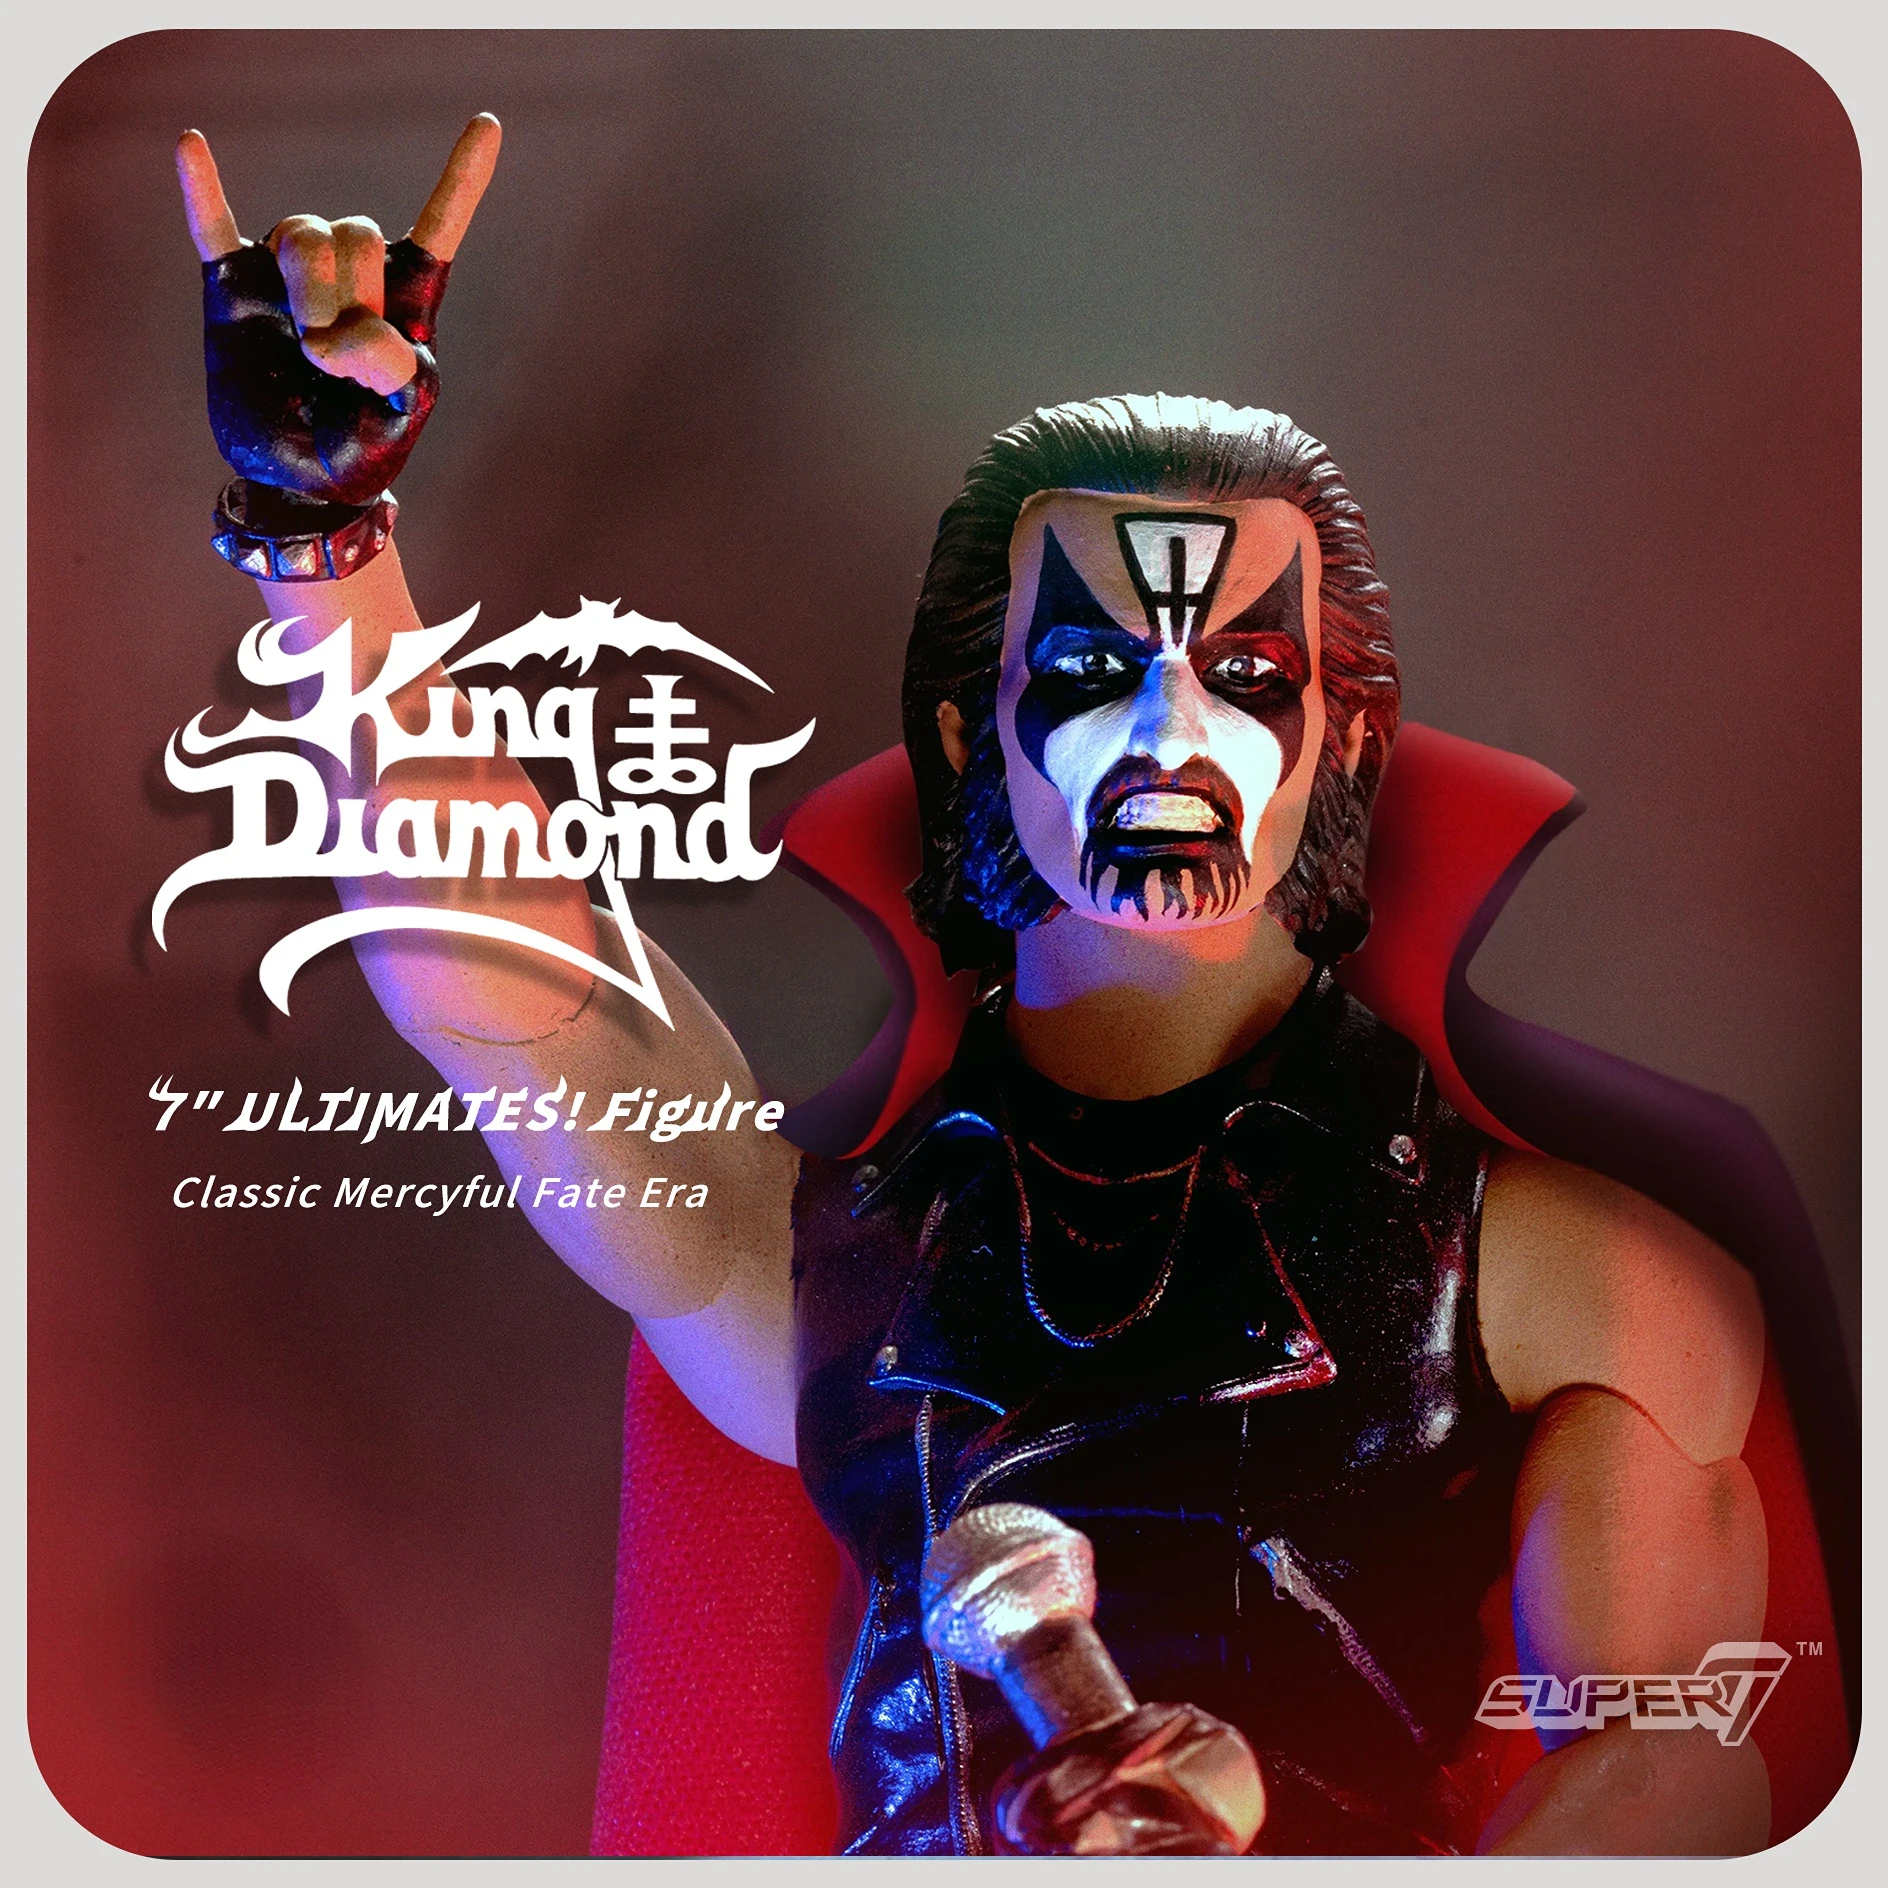 

In Stock Super7 King Diamond Classic Mercyful Fate Era 8 Inches 18cm PVC Original Action Figure Model Toy Collection Hobby Gift